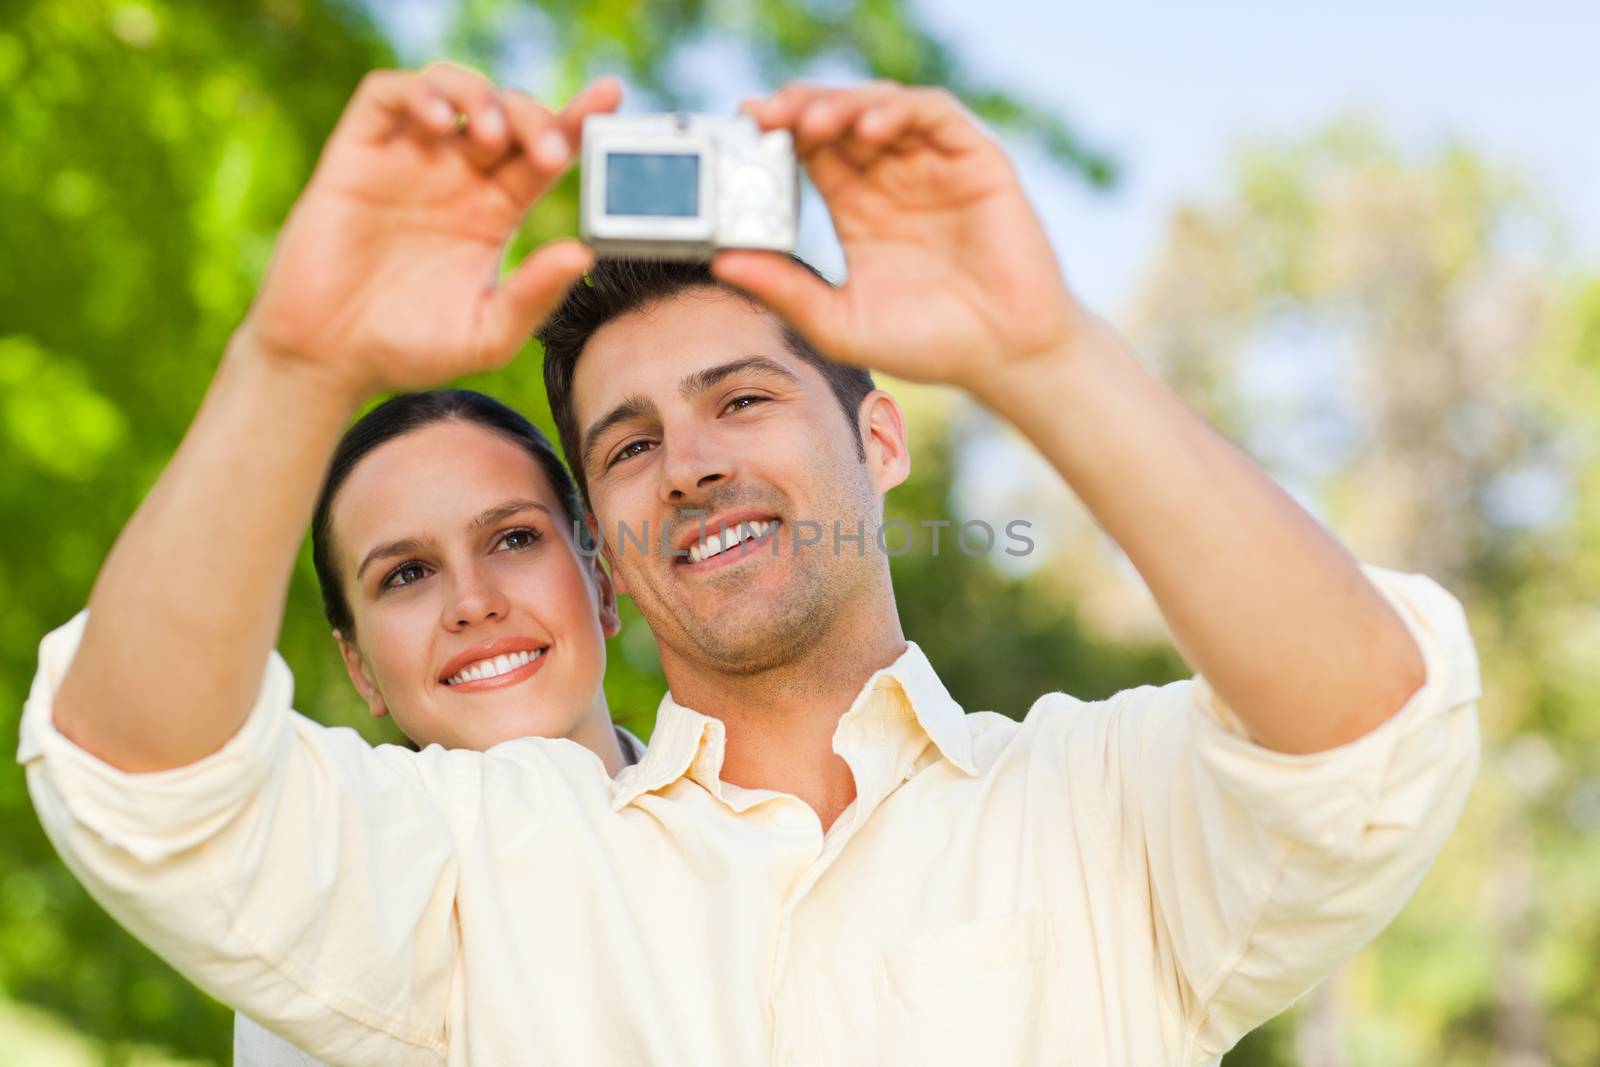 Couple taking a photo of themselves in a park